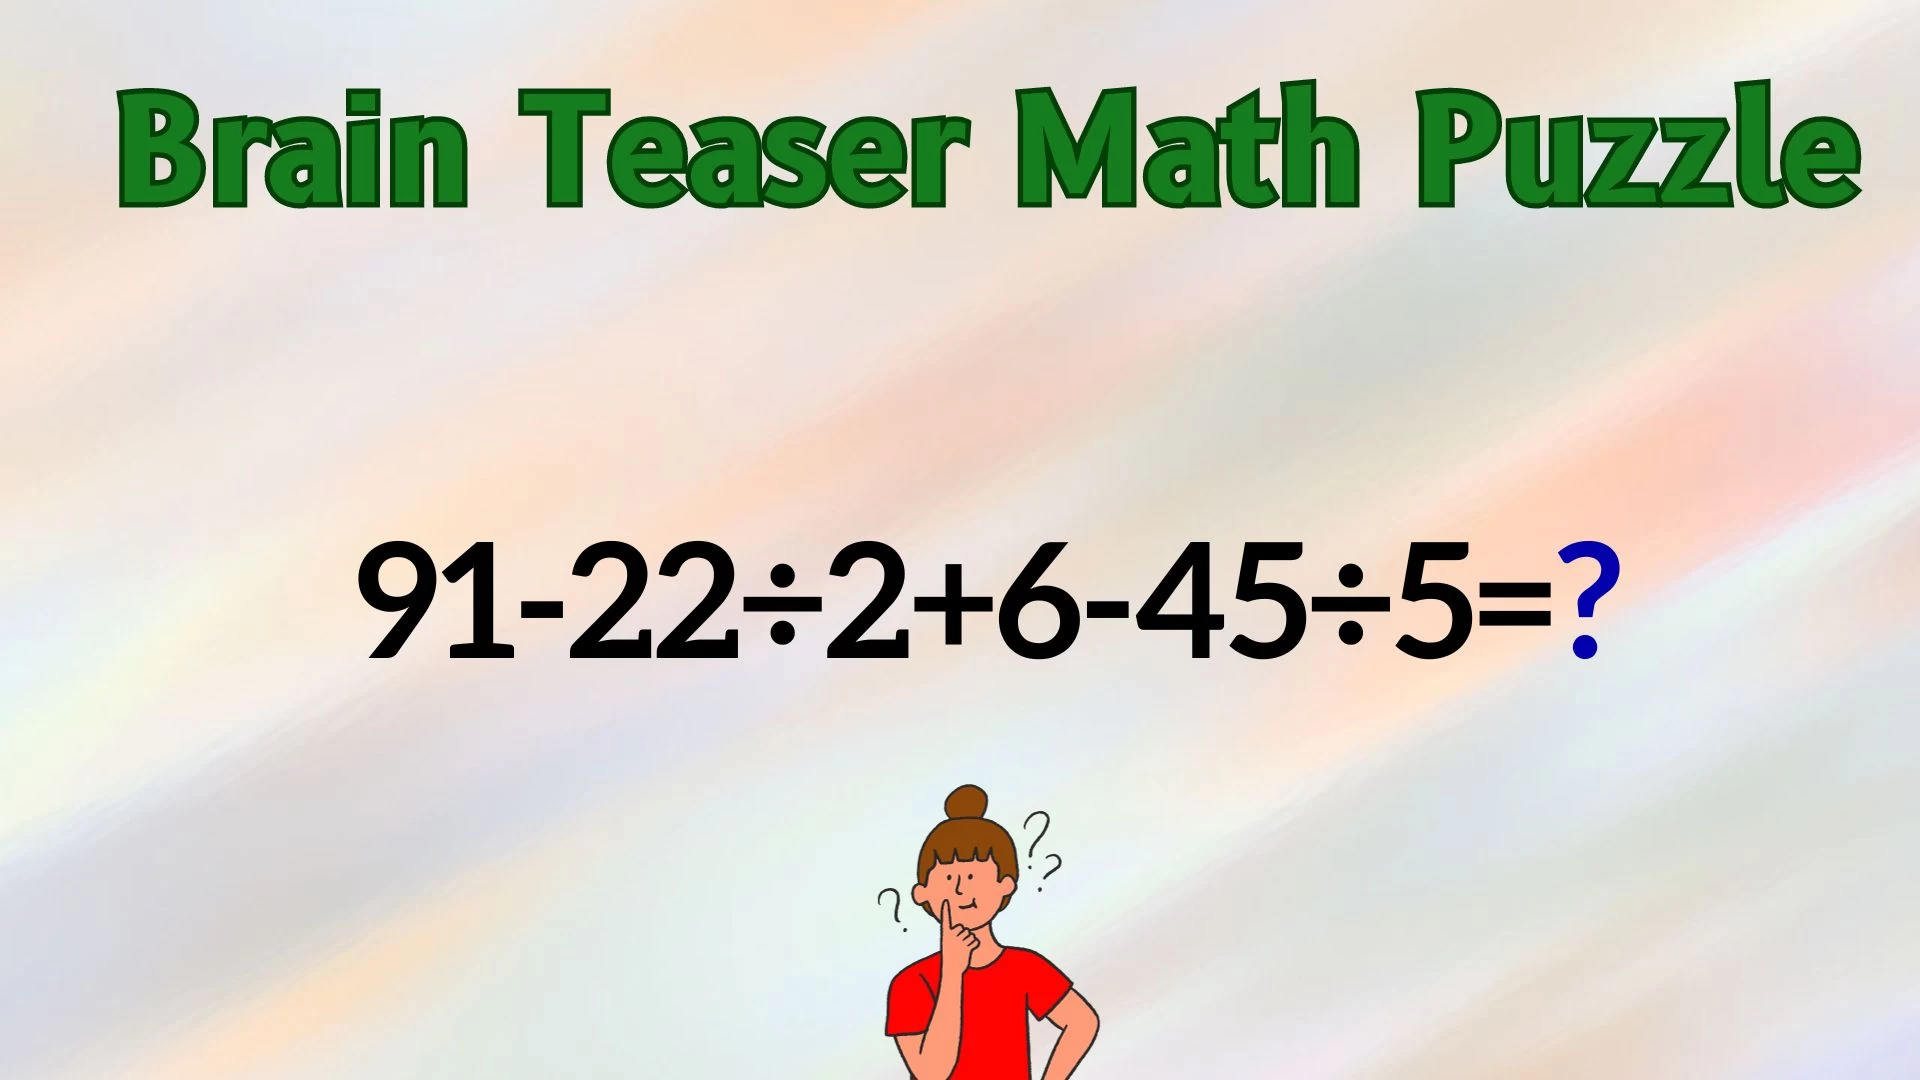 Can You Solve This Math Puzzle Equating 91-22÷2+6-45÷5=?